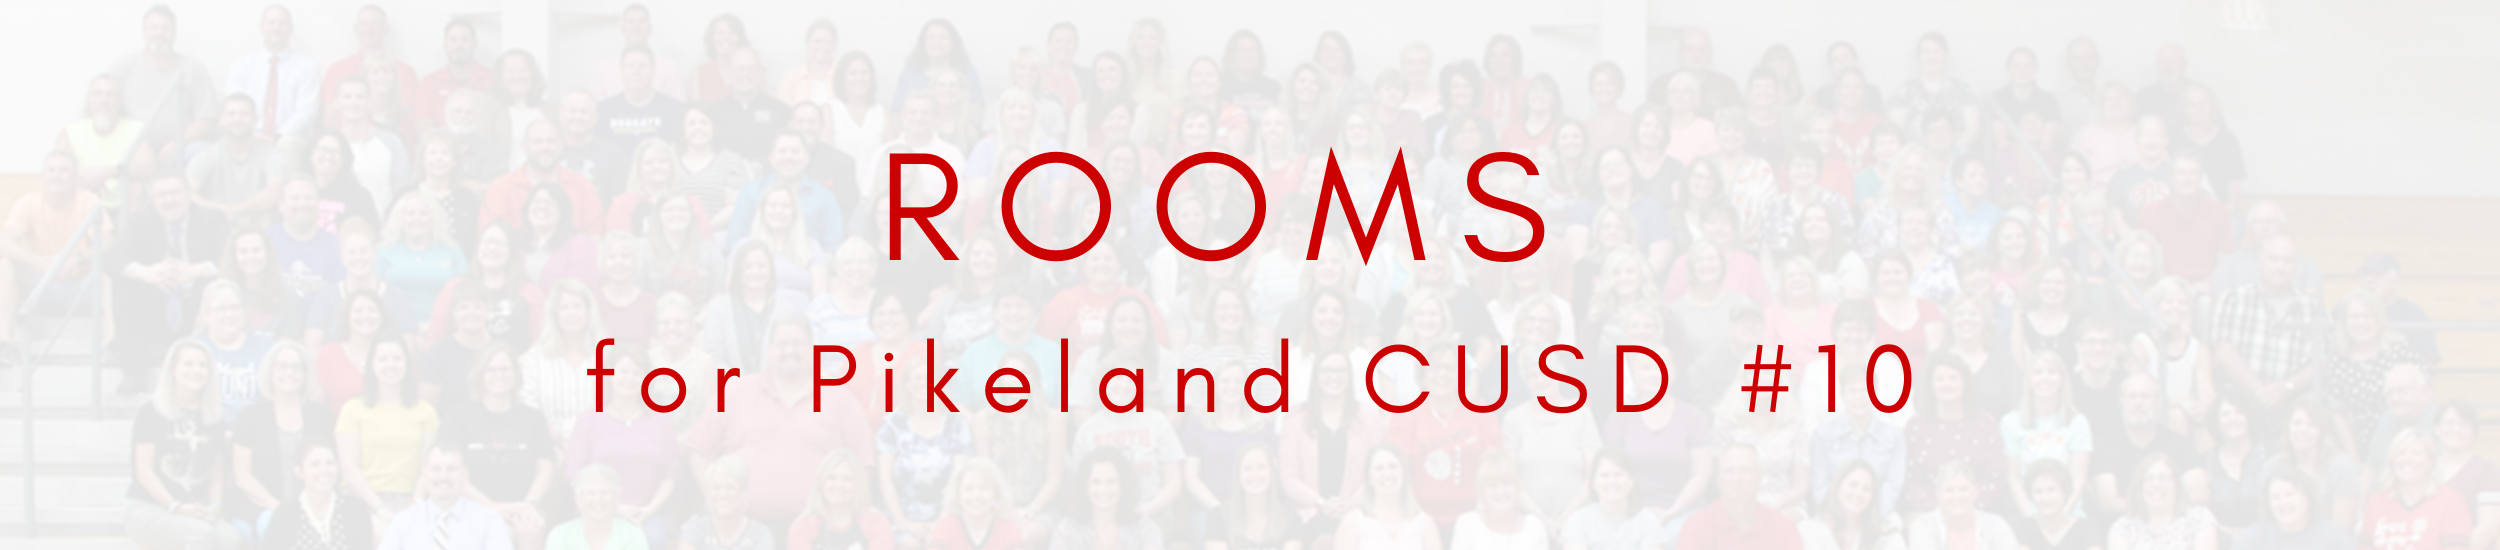 Rooms for Pikeland CUSD #10, image of staff